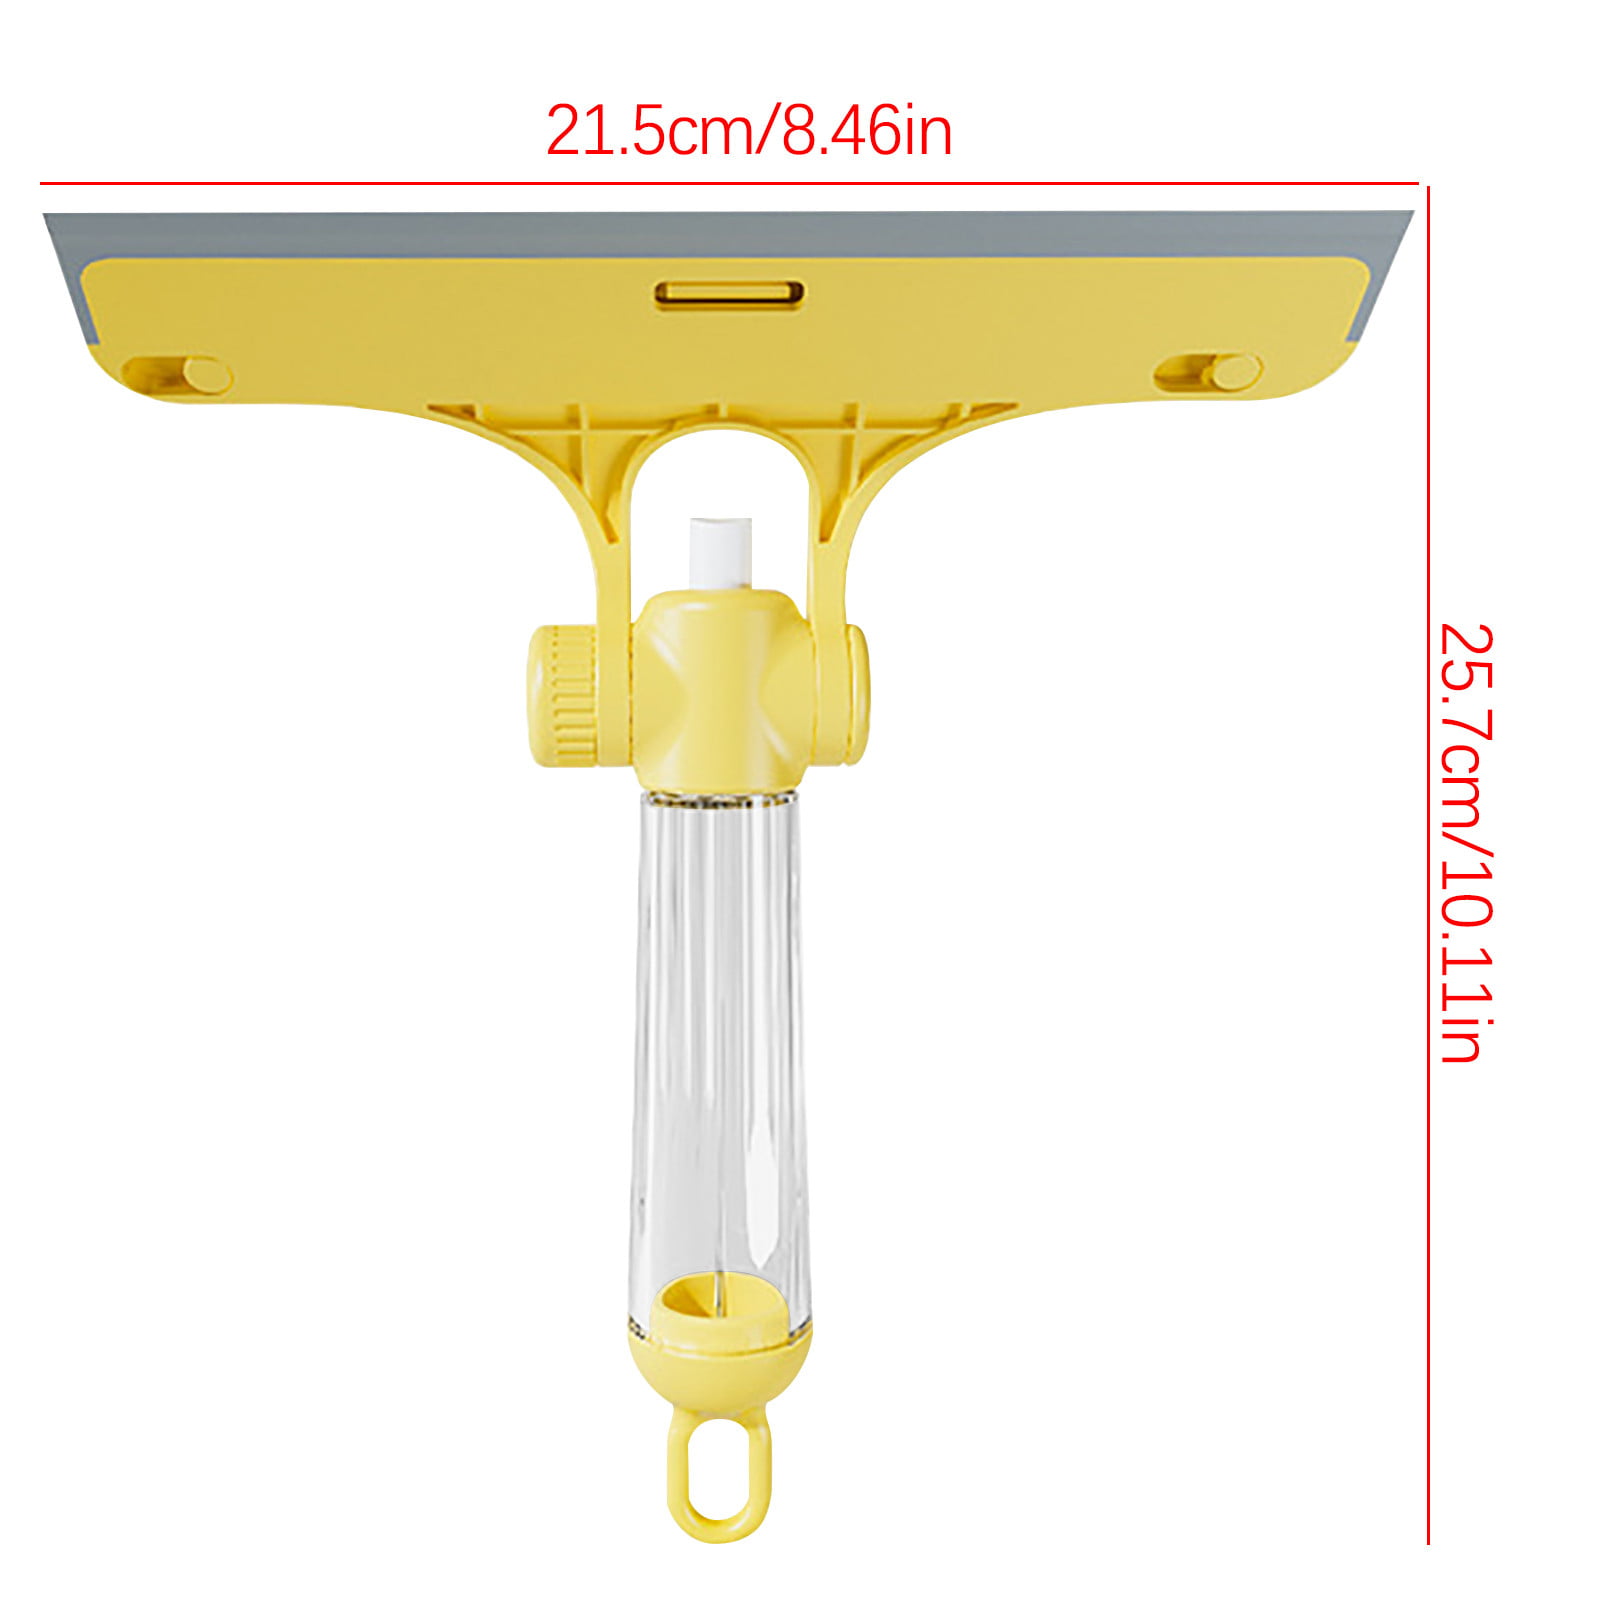 SDJMa 2-in-1 Mini Squeegee for Home, Window Squeegee for Window Cleaning,  Window Cleaner Tool for Car Windshield, Shower Door, Boat